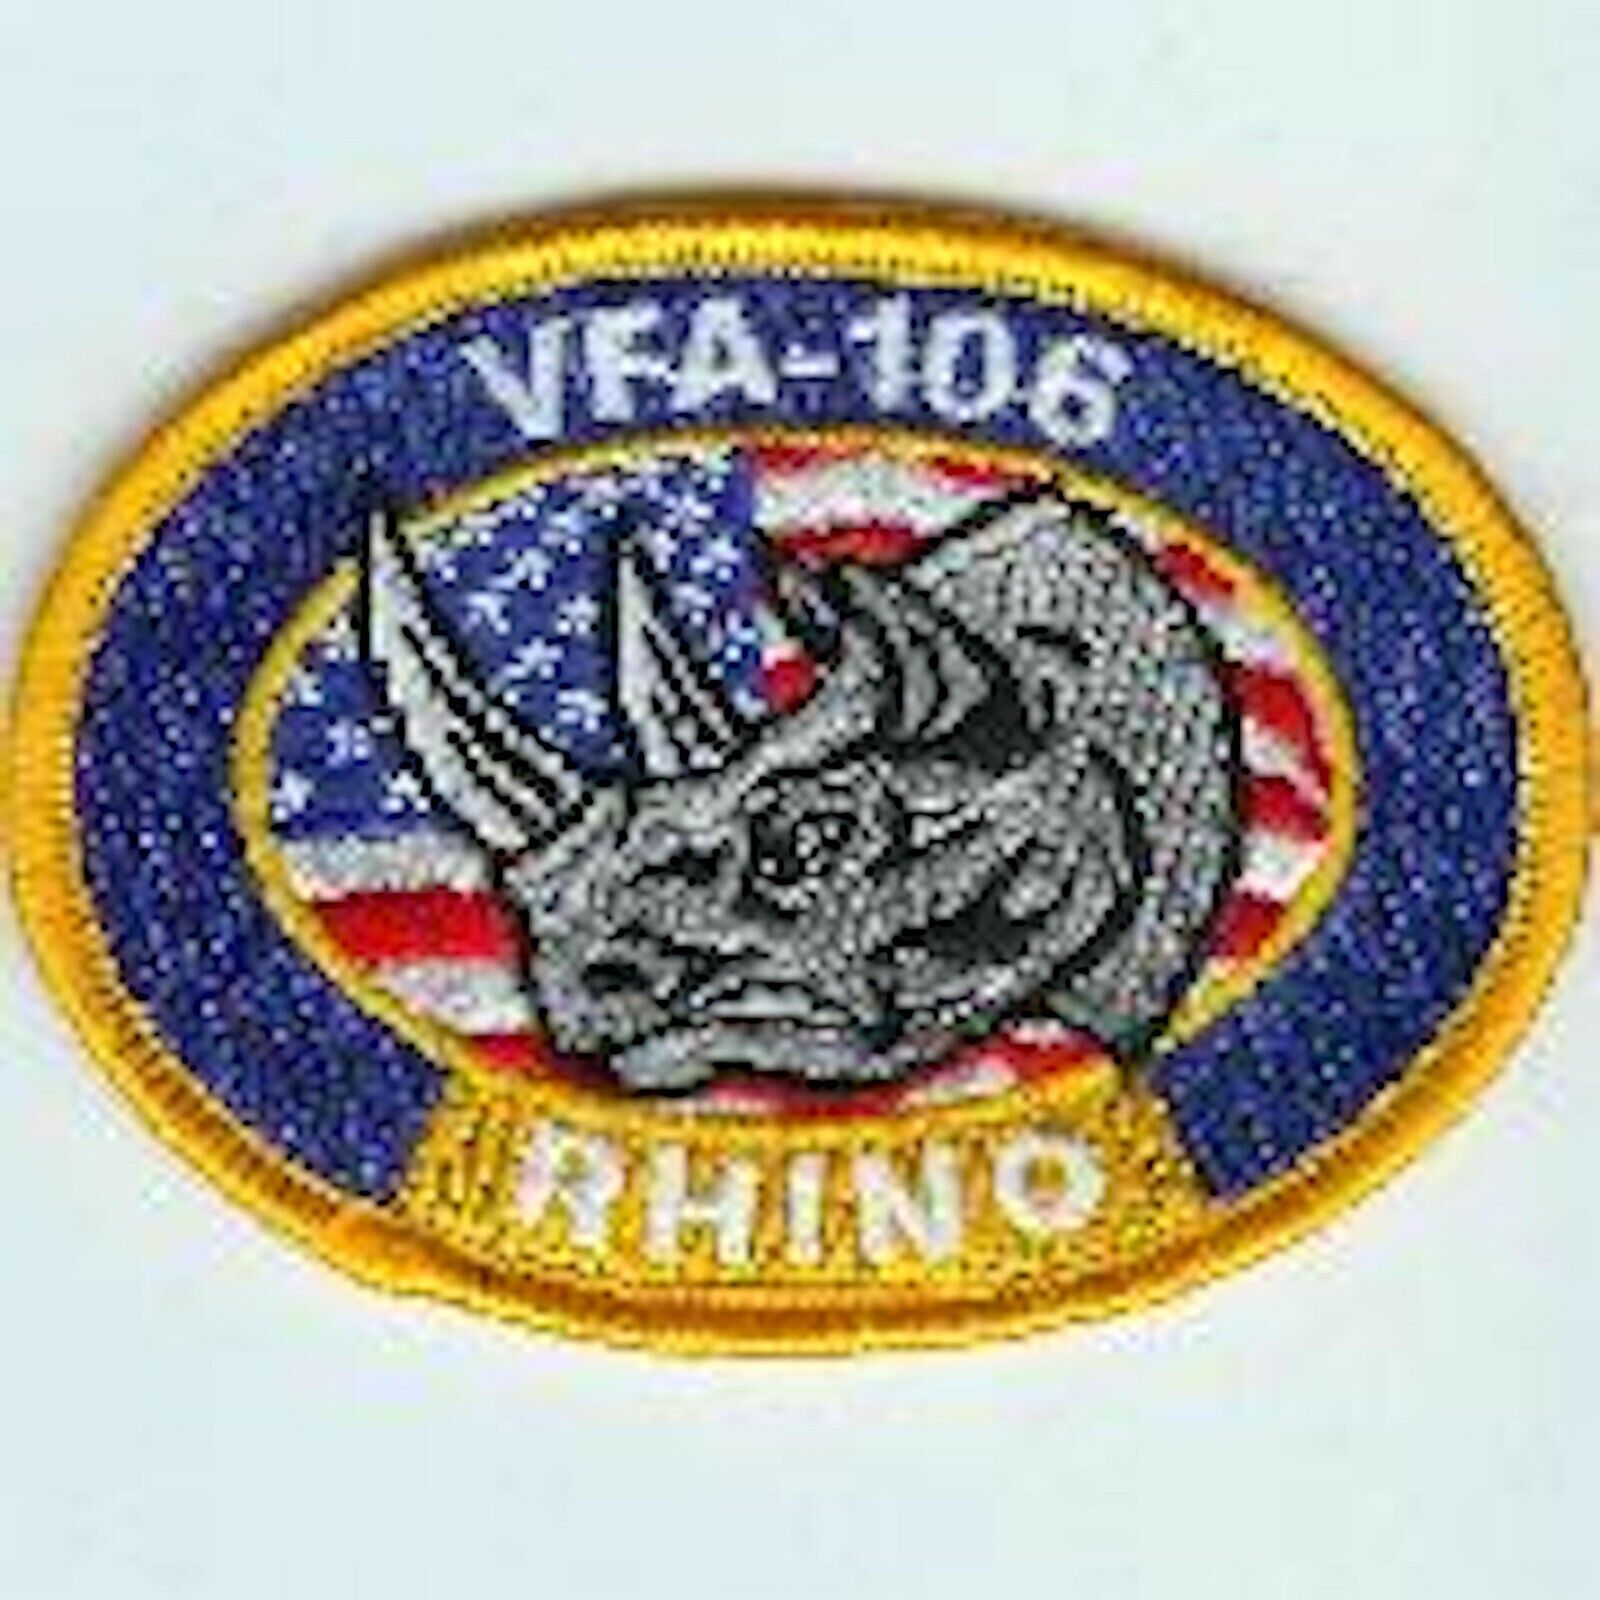 USAF AIR FORCE VFA-106 YELLOW OVAL RHINO FRS RAG EMBROIDERED JACKET PATCH